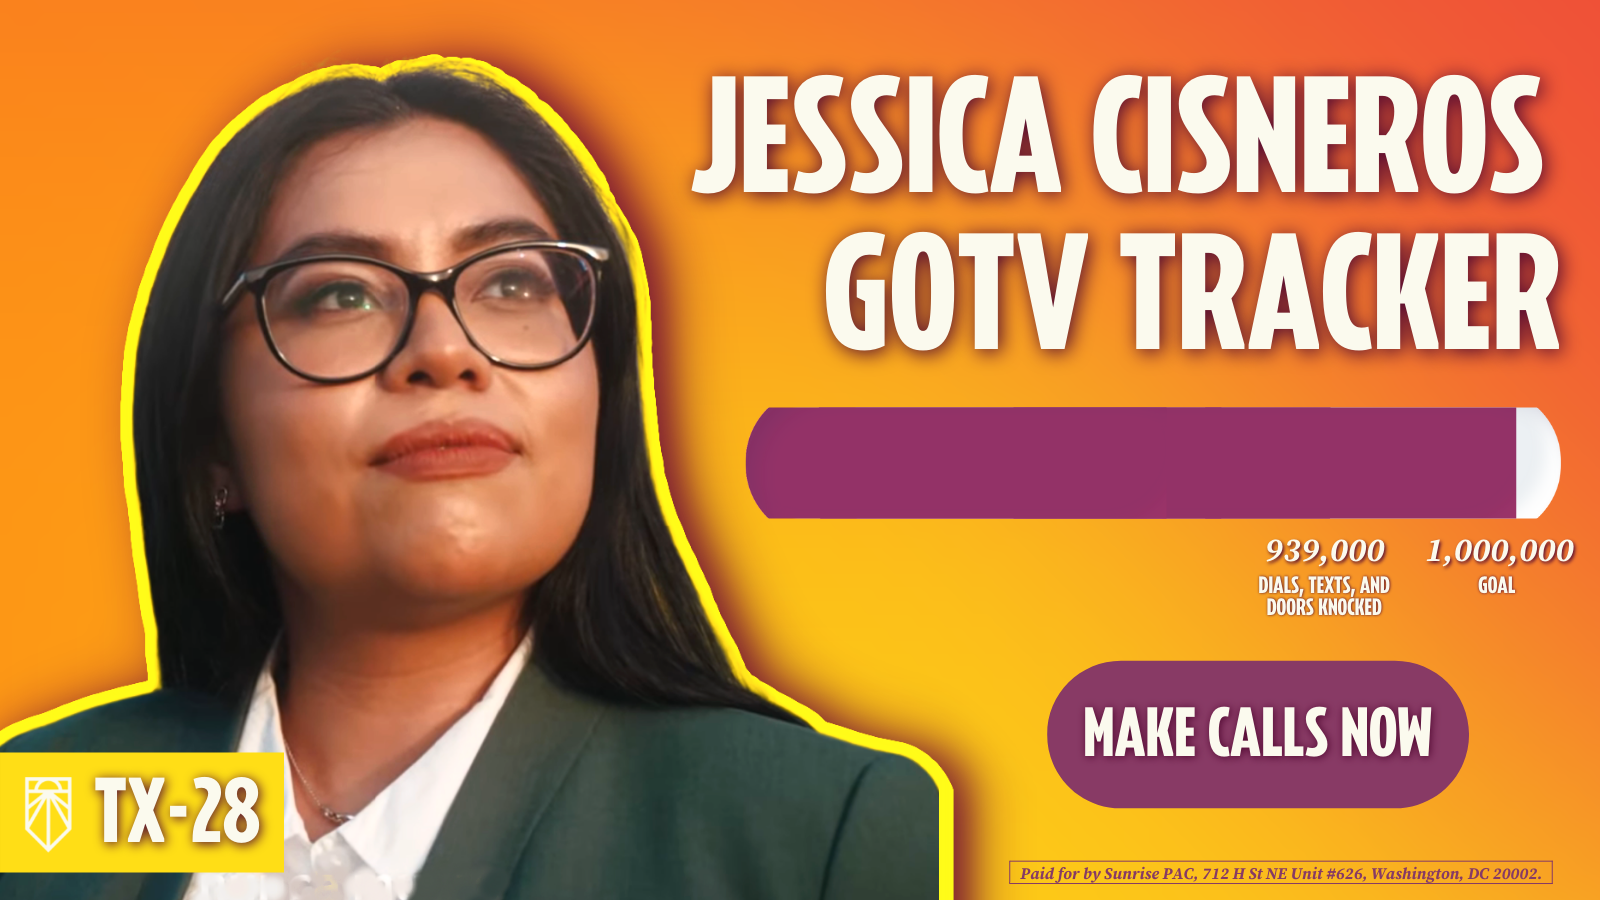 Jessica Cisneros GOTV Tracker - 939,000 attempted voter contacts, 1,000,000 goal - Make Calls. Paid for by Sunrise PAC, 712 H St NE Unit #626, Washington, DC 20002.